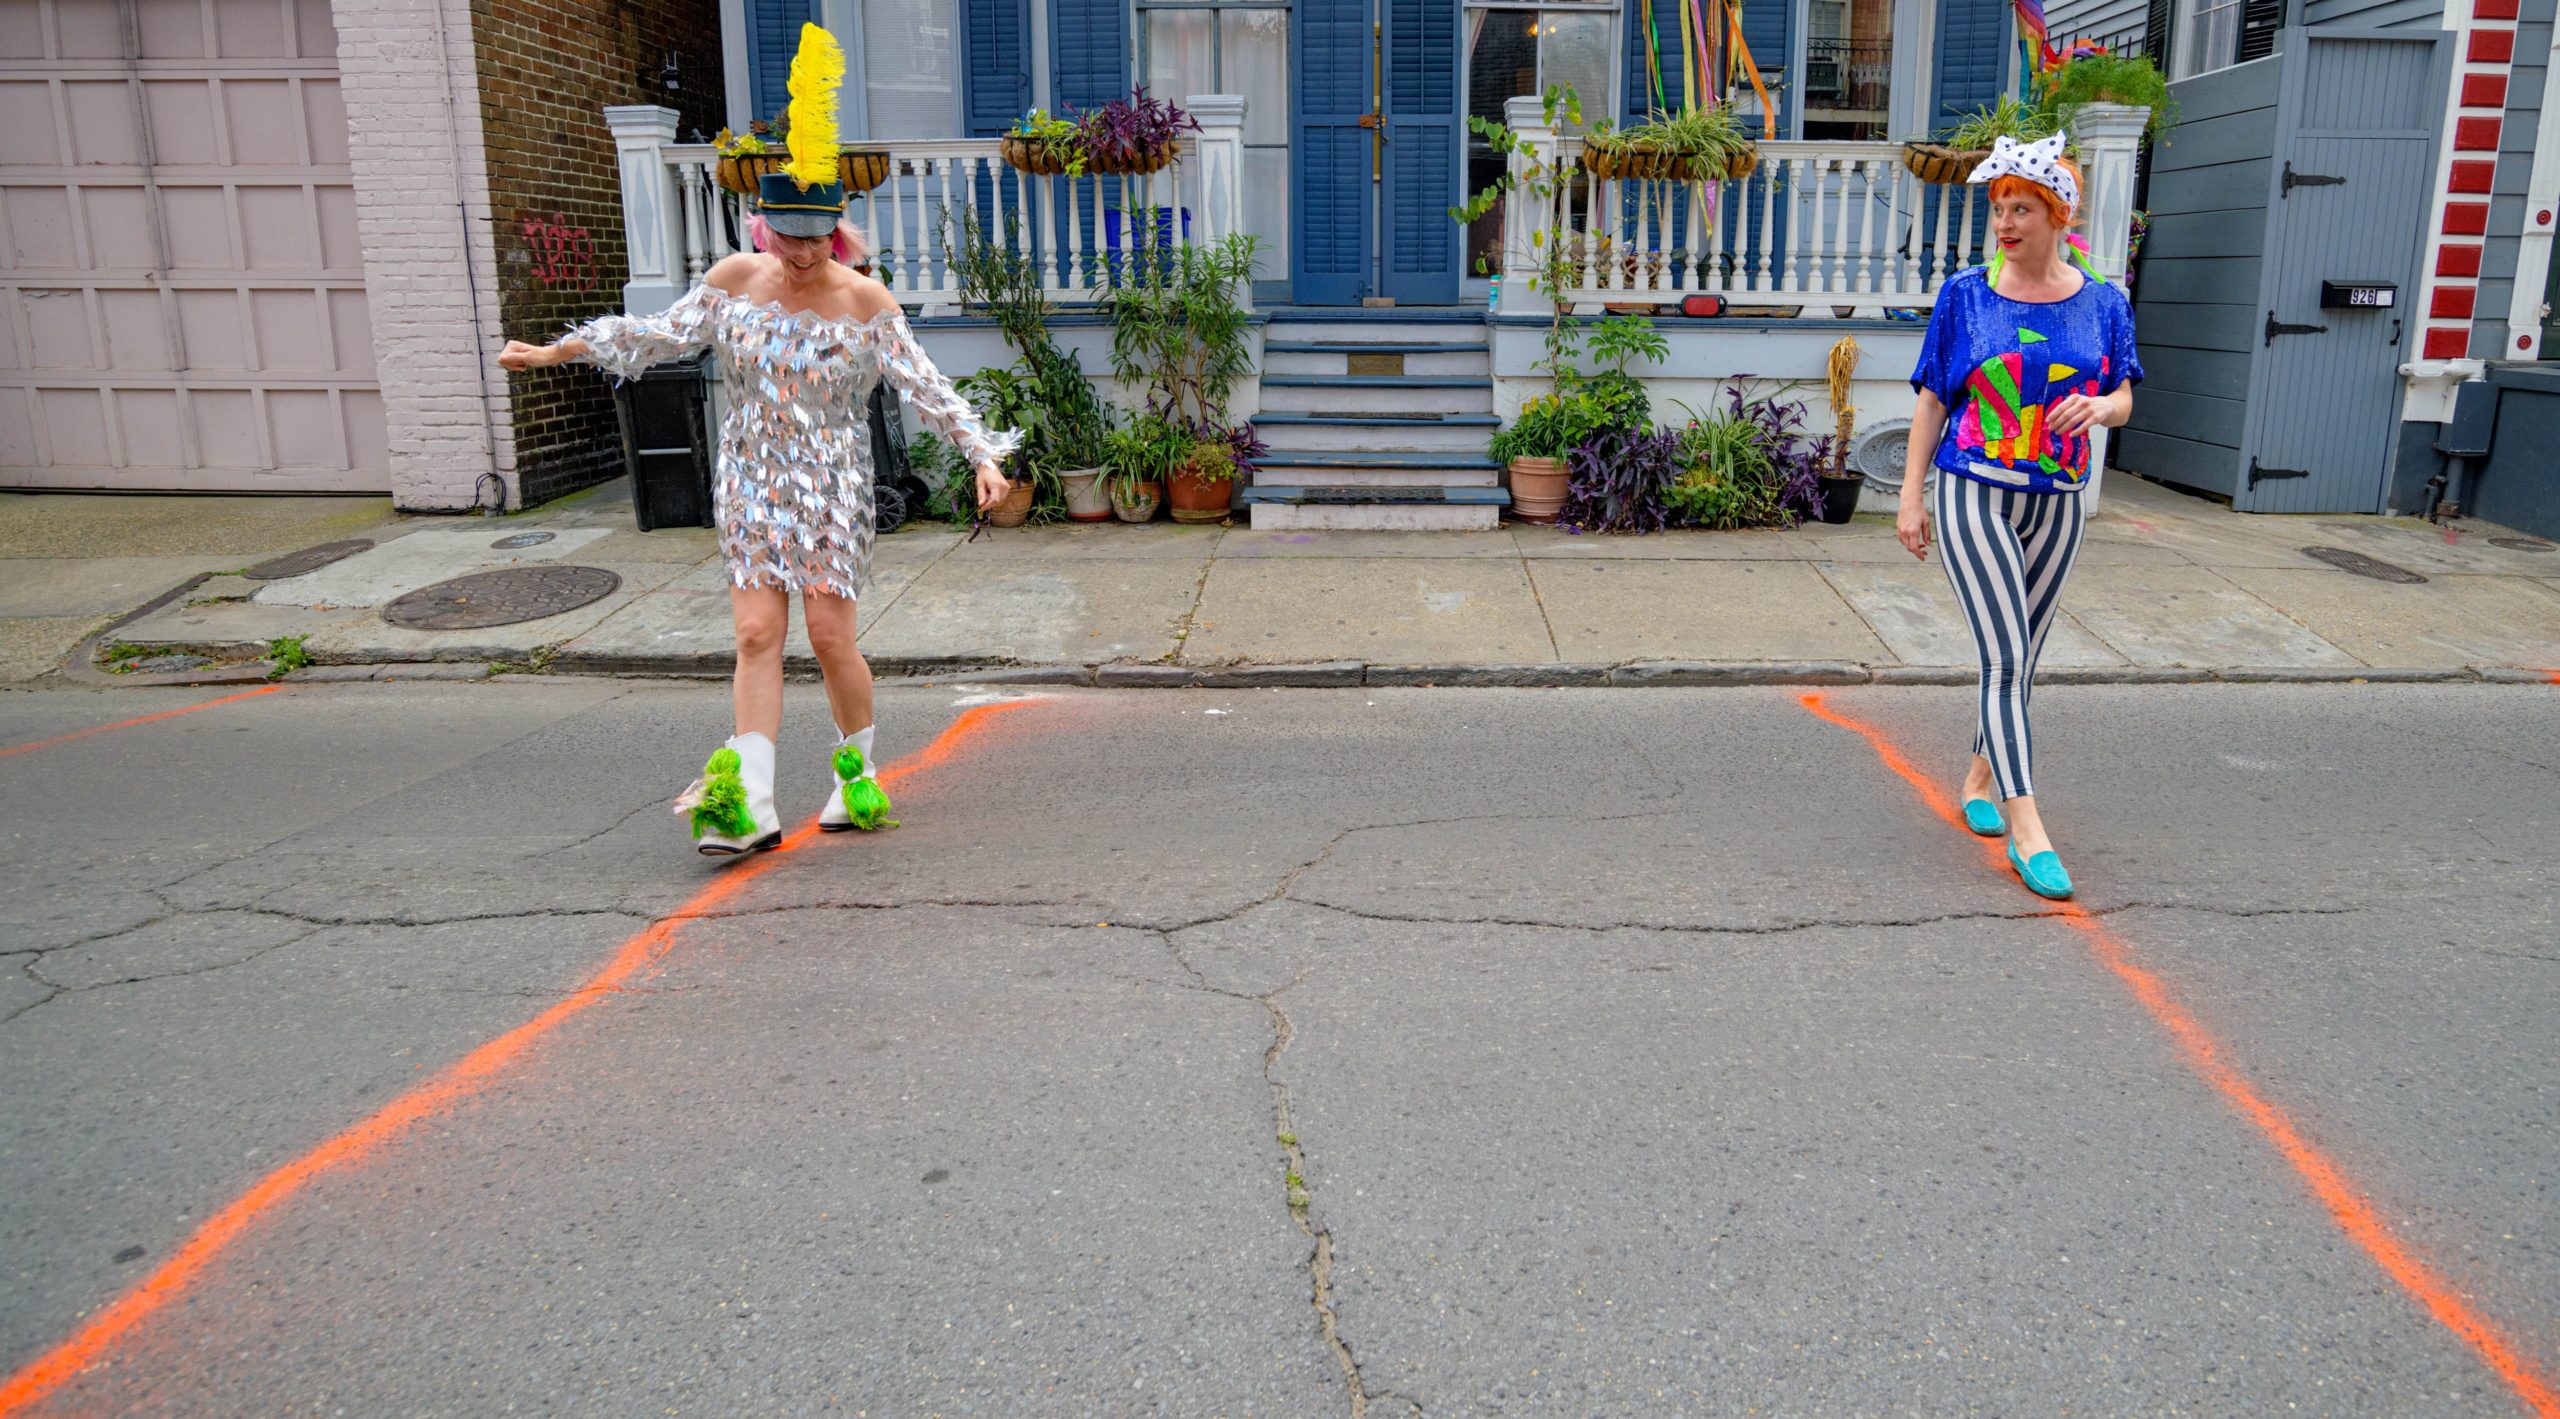 The Traveler Broads, Kerry Maloney, left, and Jessica Fender, line dance ten-feet apart to keep a safe distance during the COVID-19 pandemic near their home in New Orleans, St. Josephs Day, Thursday, March 19, 2020. Photo by Matthew Hinton